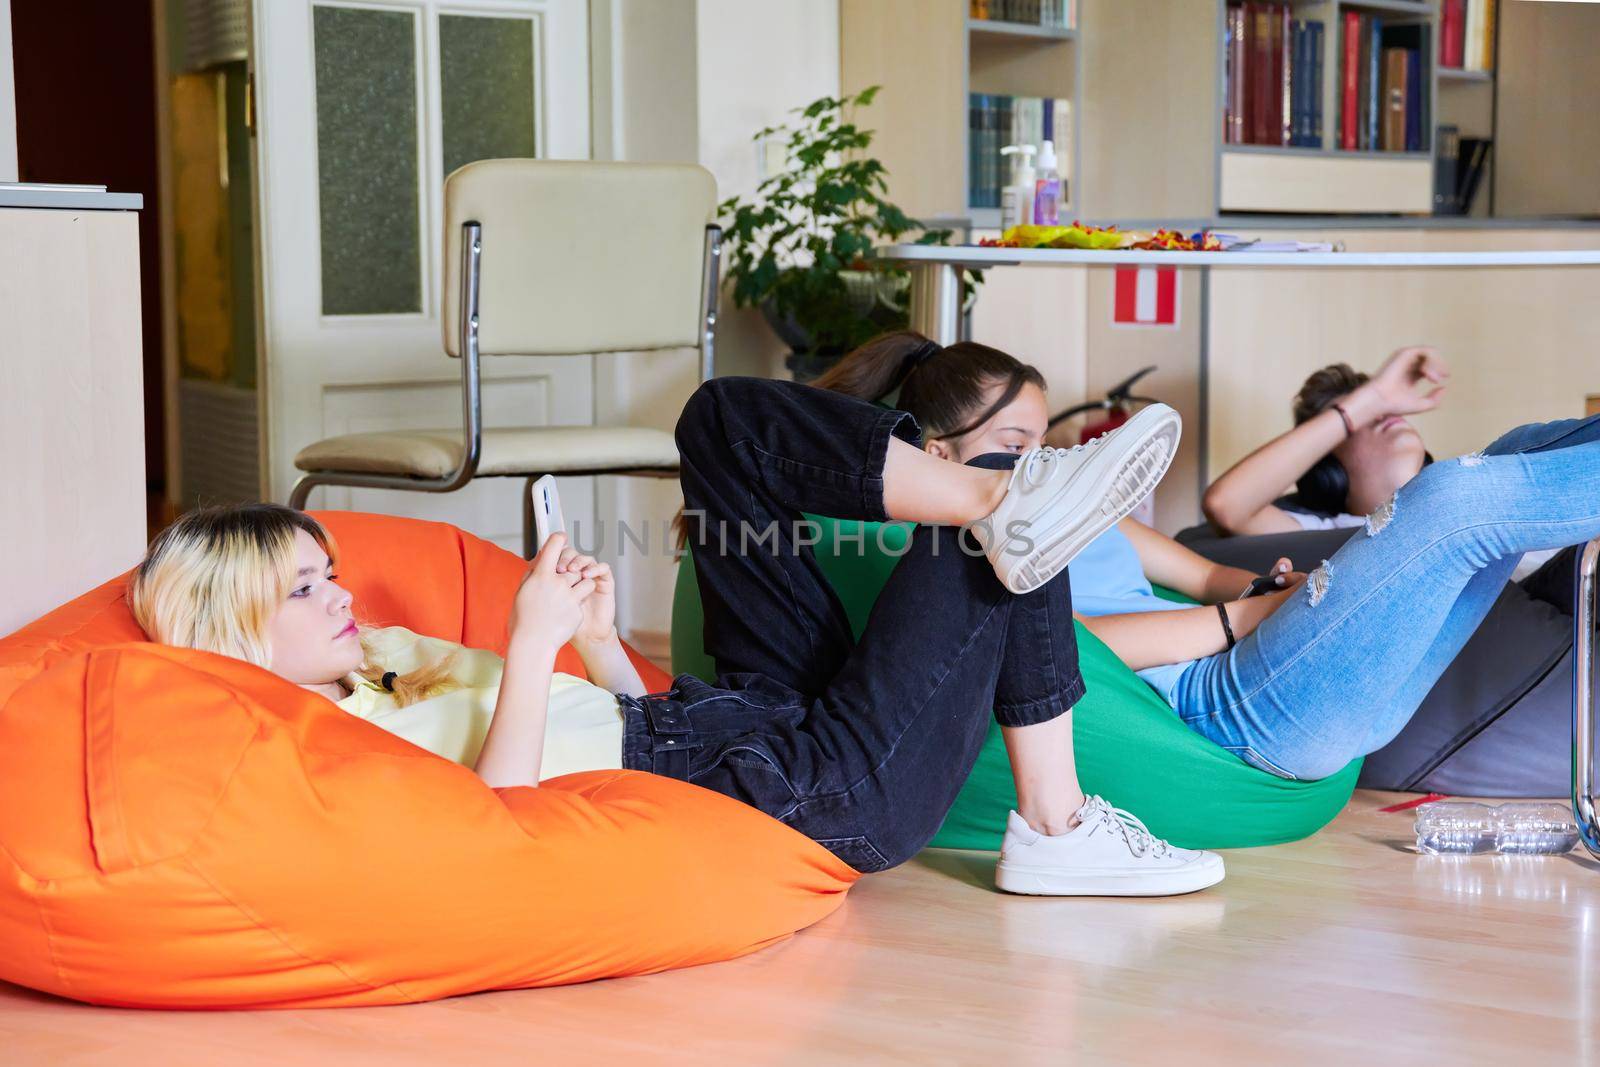 Teenage students resting in the classroom on bean bags on the floor. by VH-studio